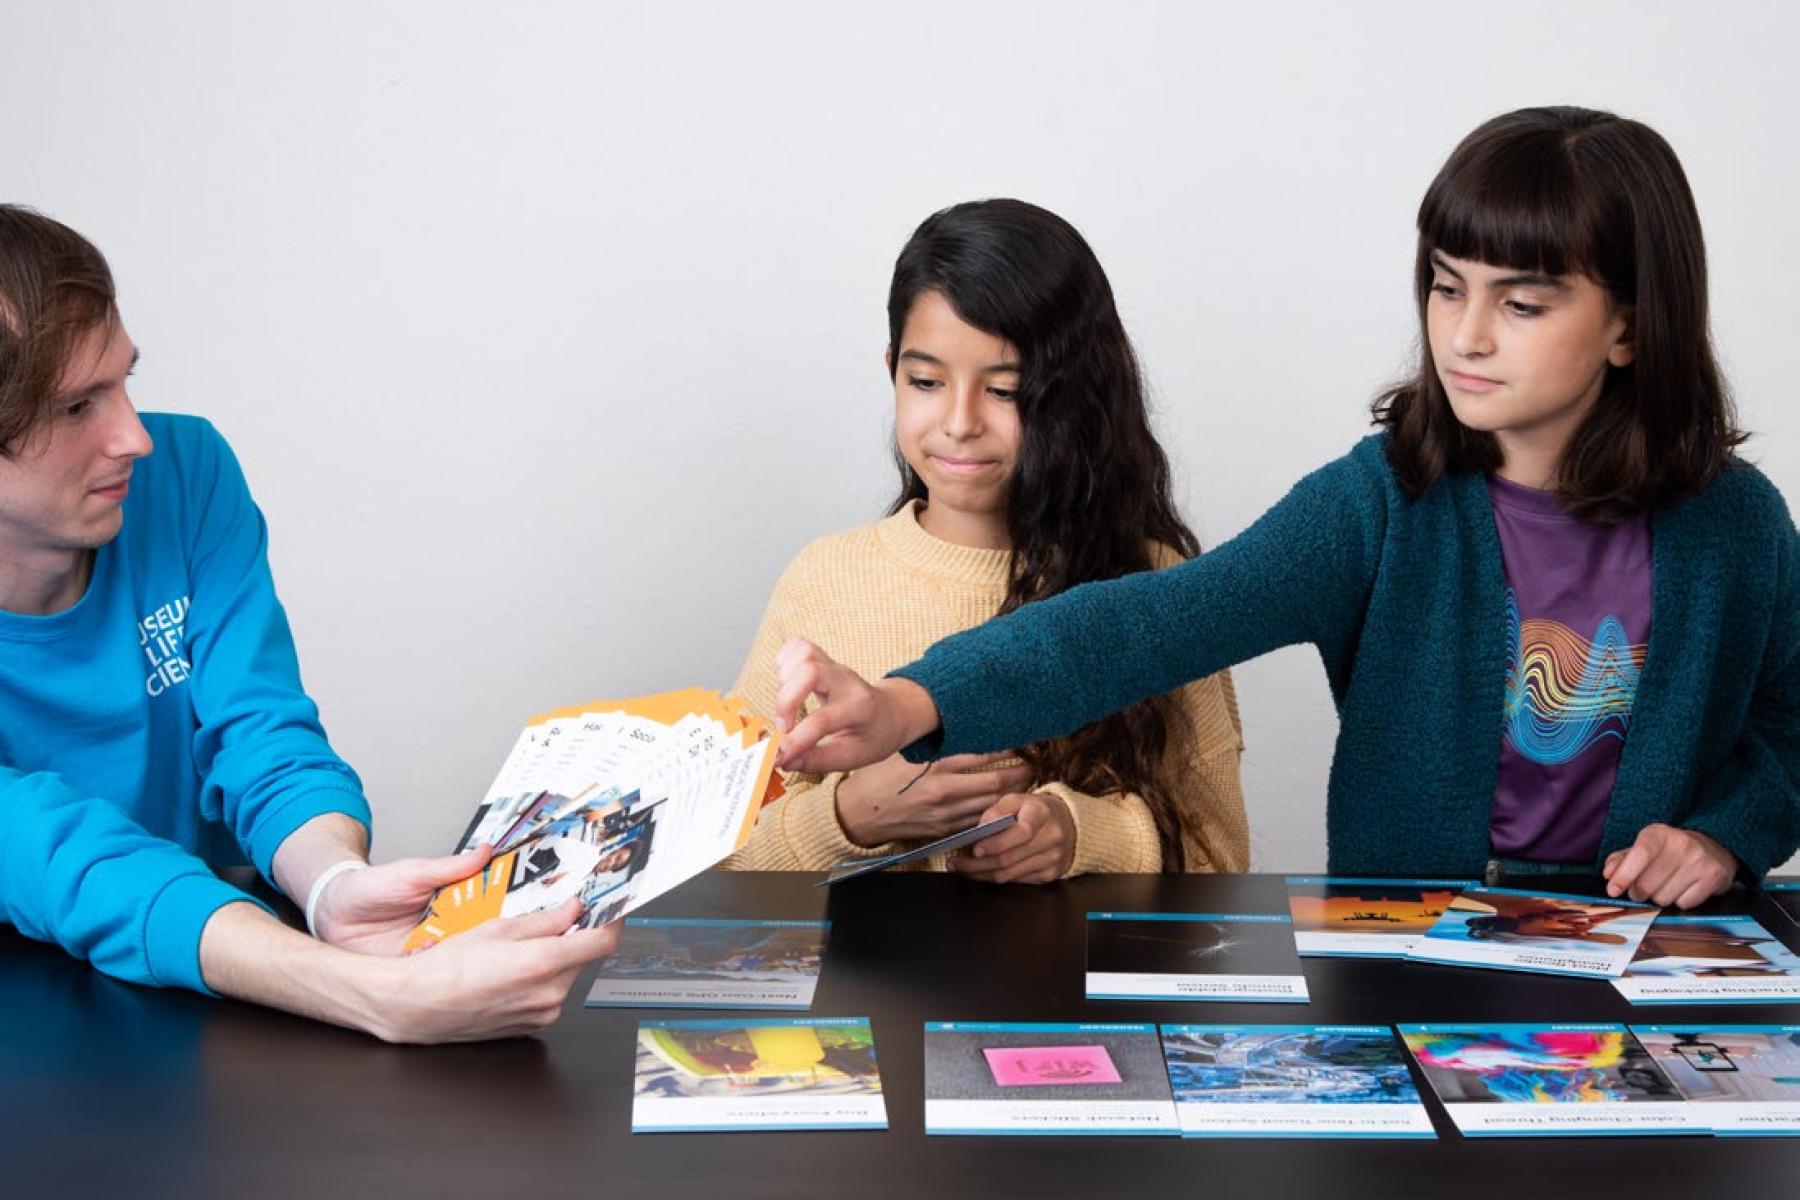 An adult and two children sit at a table spread with radio technology cards. The adult holds a set of fanned-out cards as one of the children reaches out to select a card.